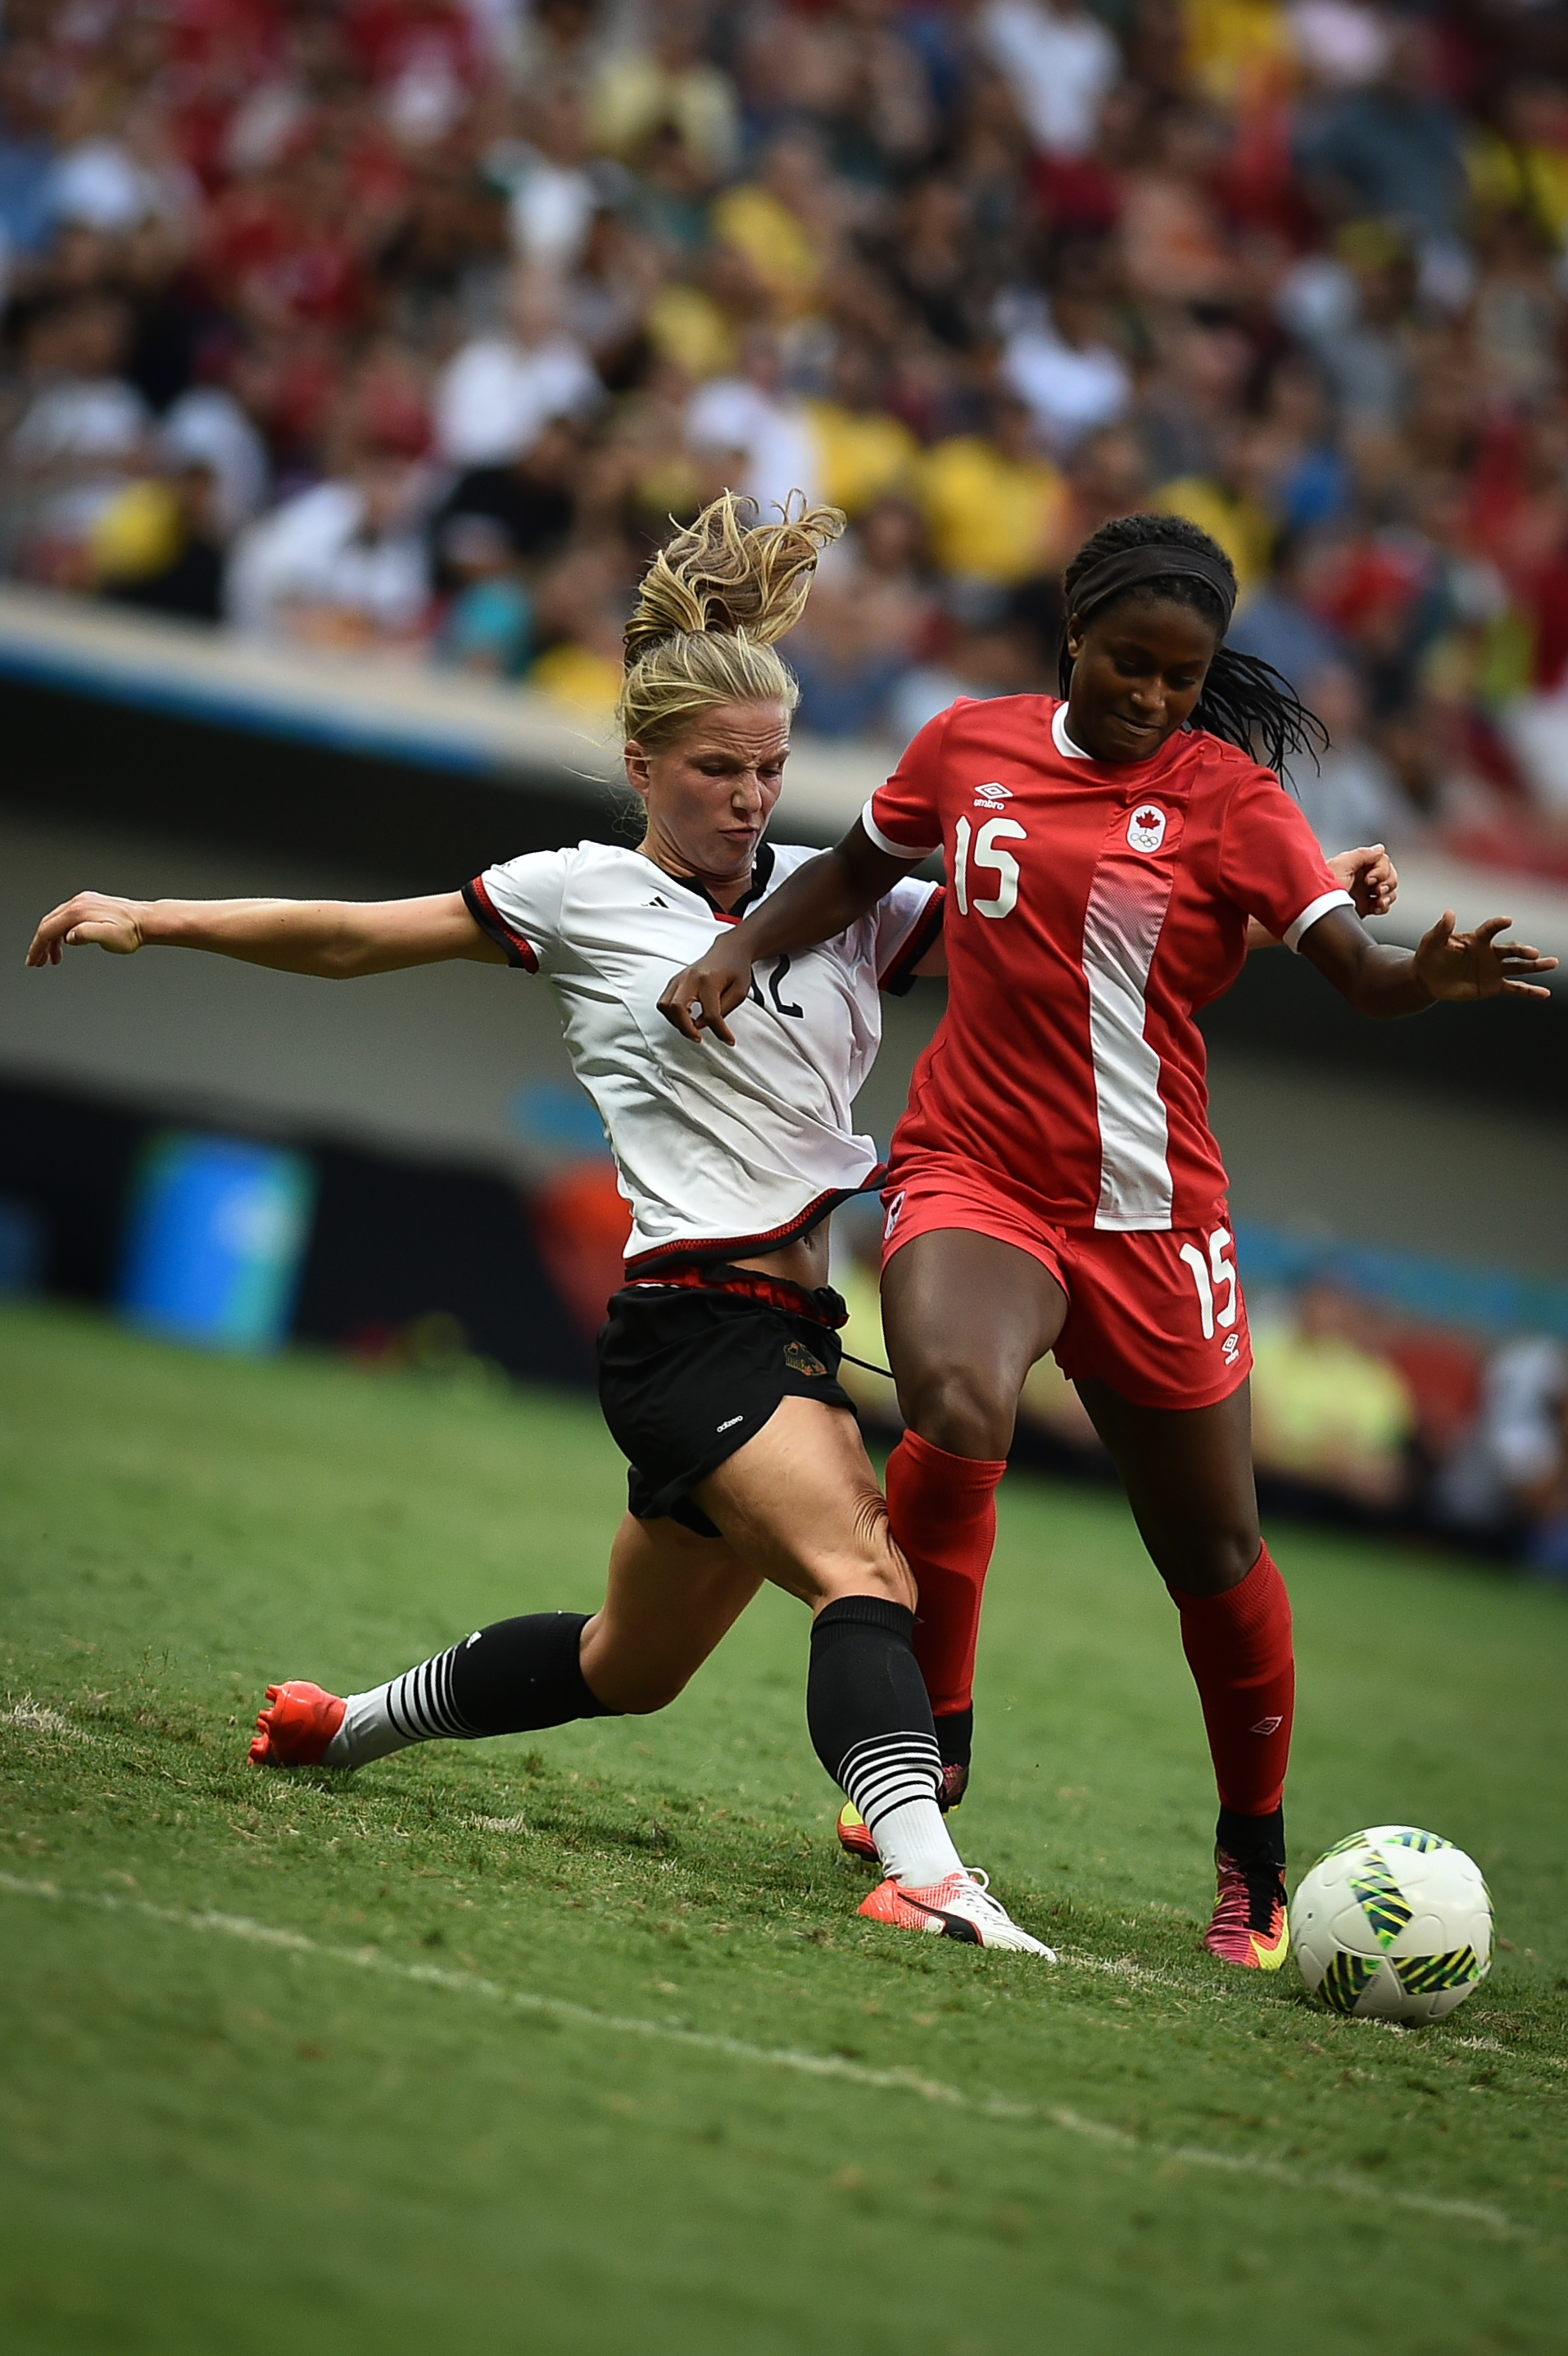 What if you could live off Victory? | Germany vs. Canada, by Agência Brasília - Alemanha x Canadá - Futebol feminino - Olimpíadas Rio 2016, CC BY 2.0, https://commons.wikimedia.org/w/index.php?curid=50584138